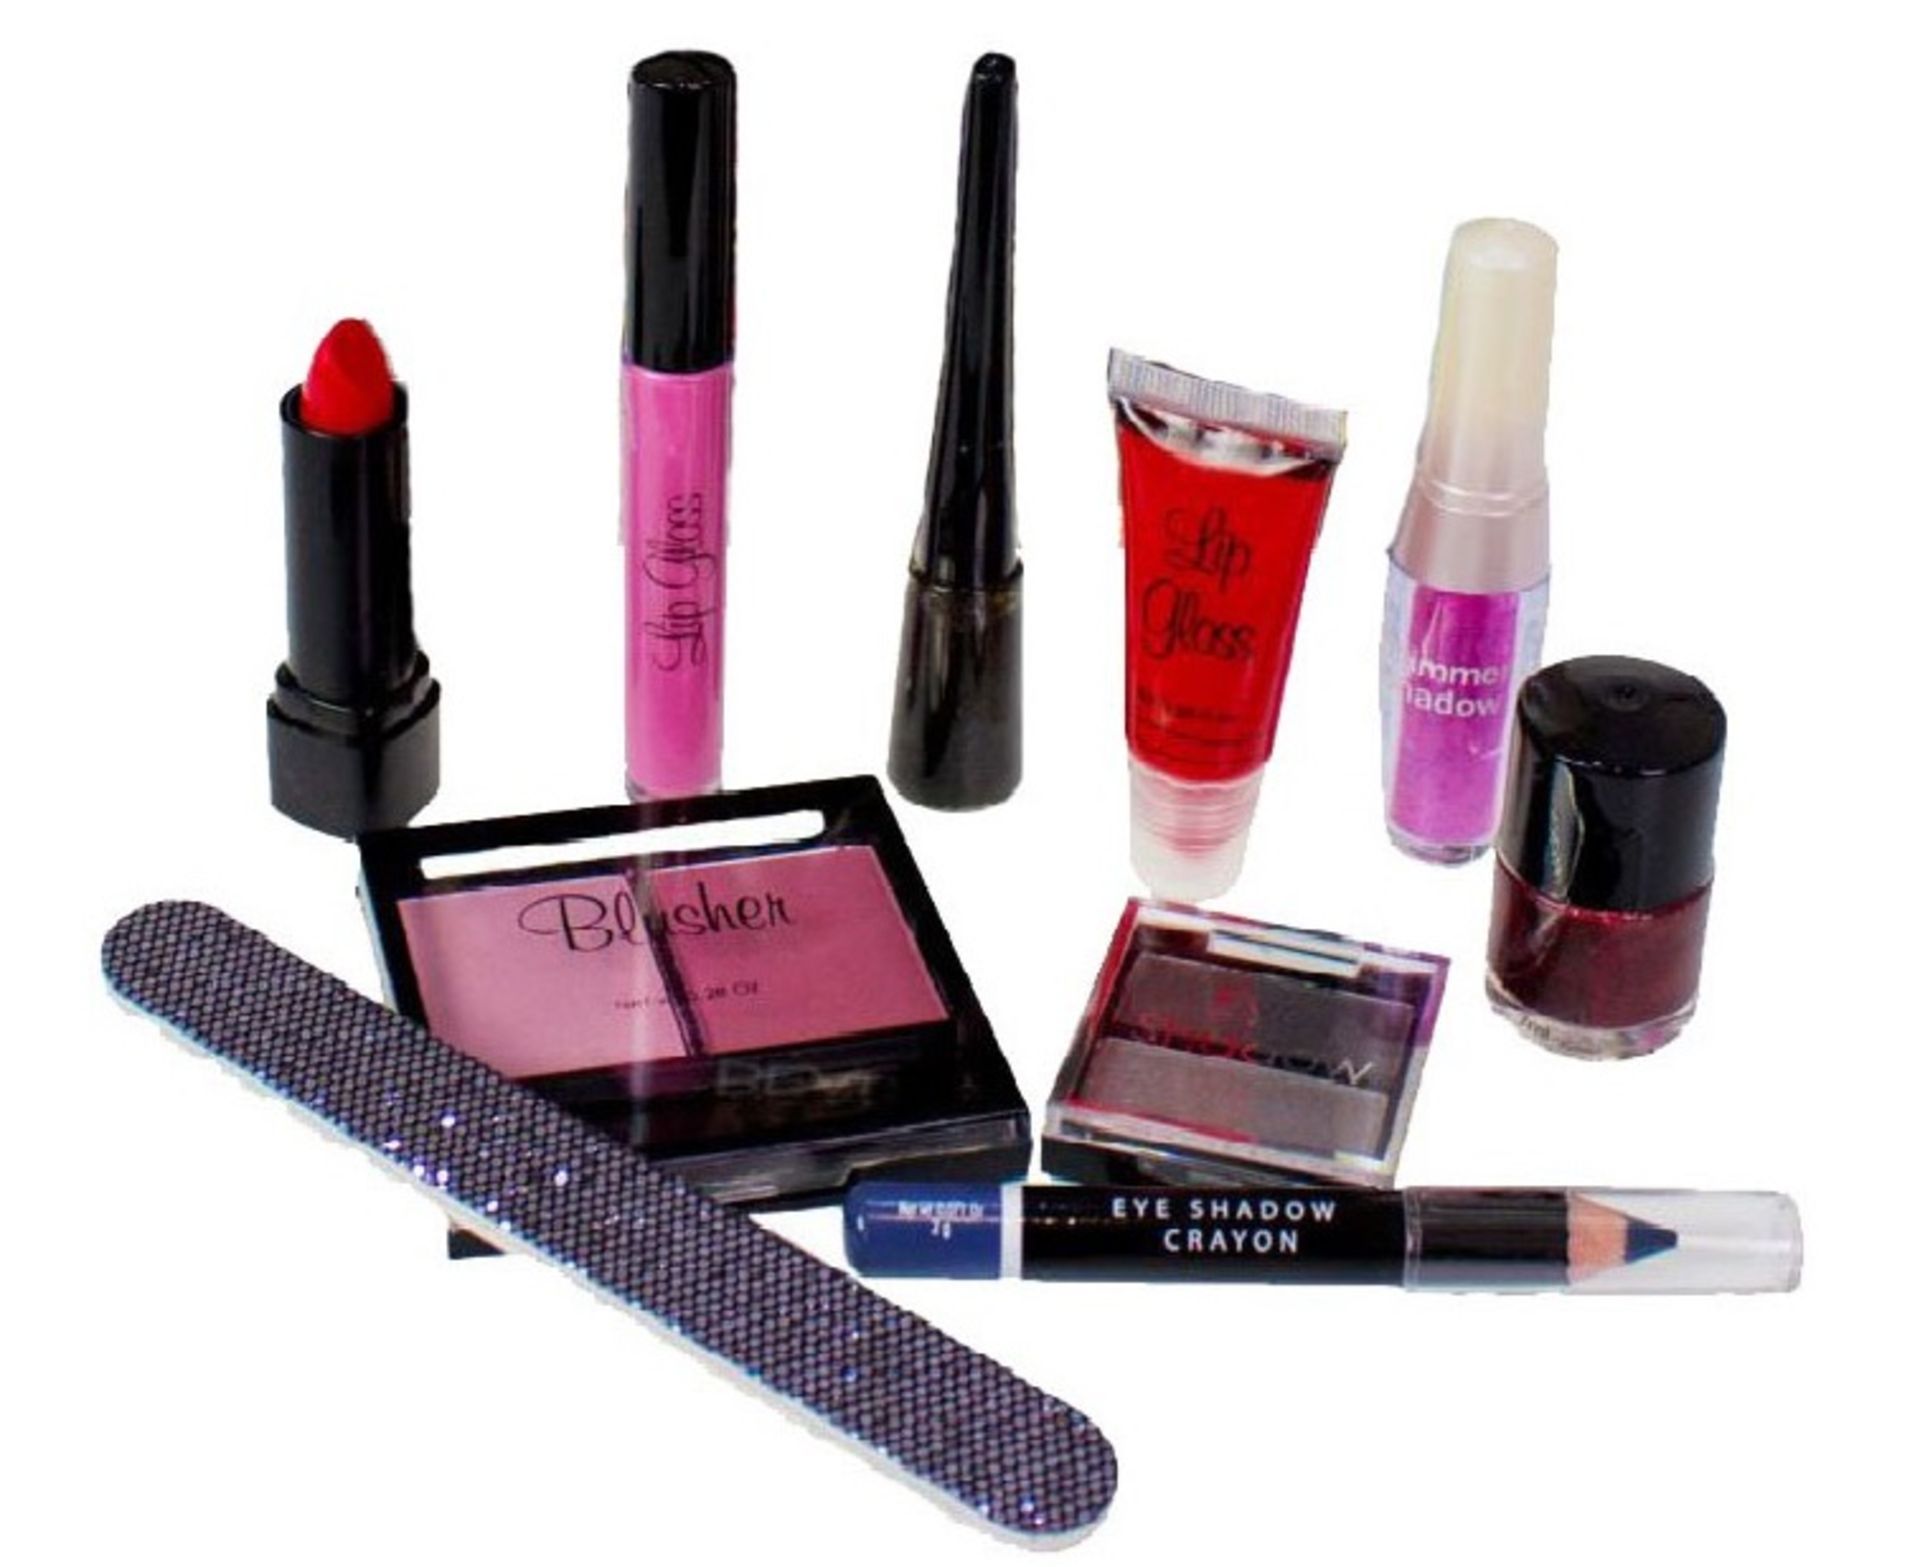 V *TRADE QTY* Brand New Ten Beauty Product Selection in Gift Bag (Contents vary) X 12 YOUR BID PRICE